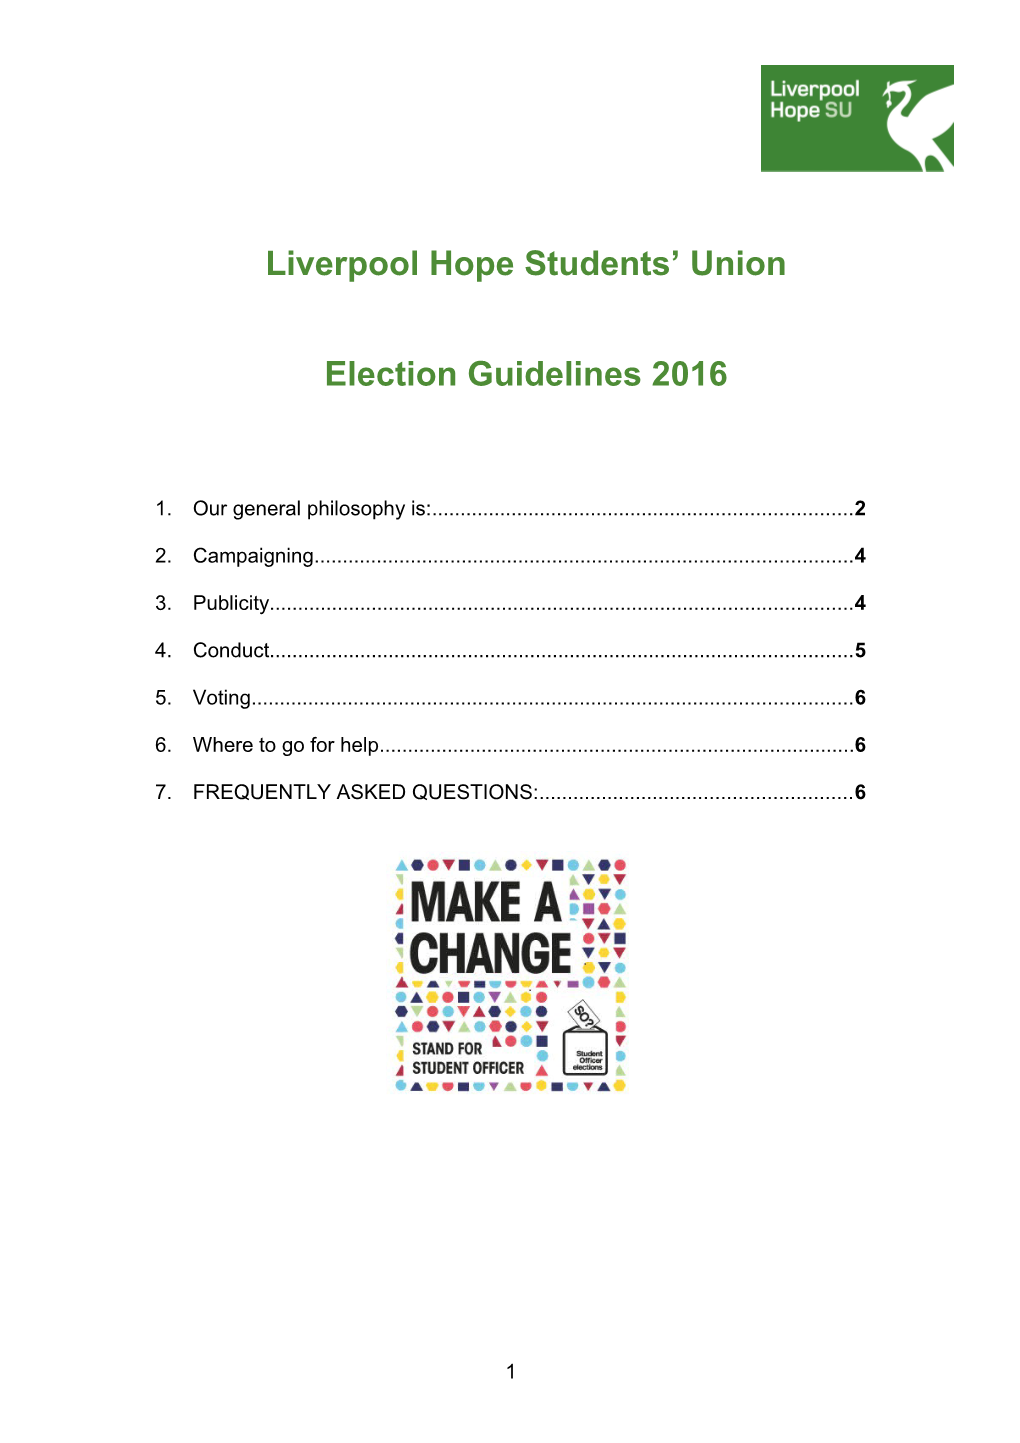 Liverpool Hope Student Union Election Rules